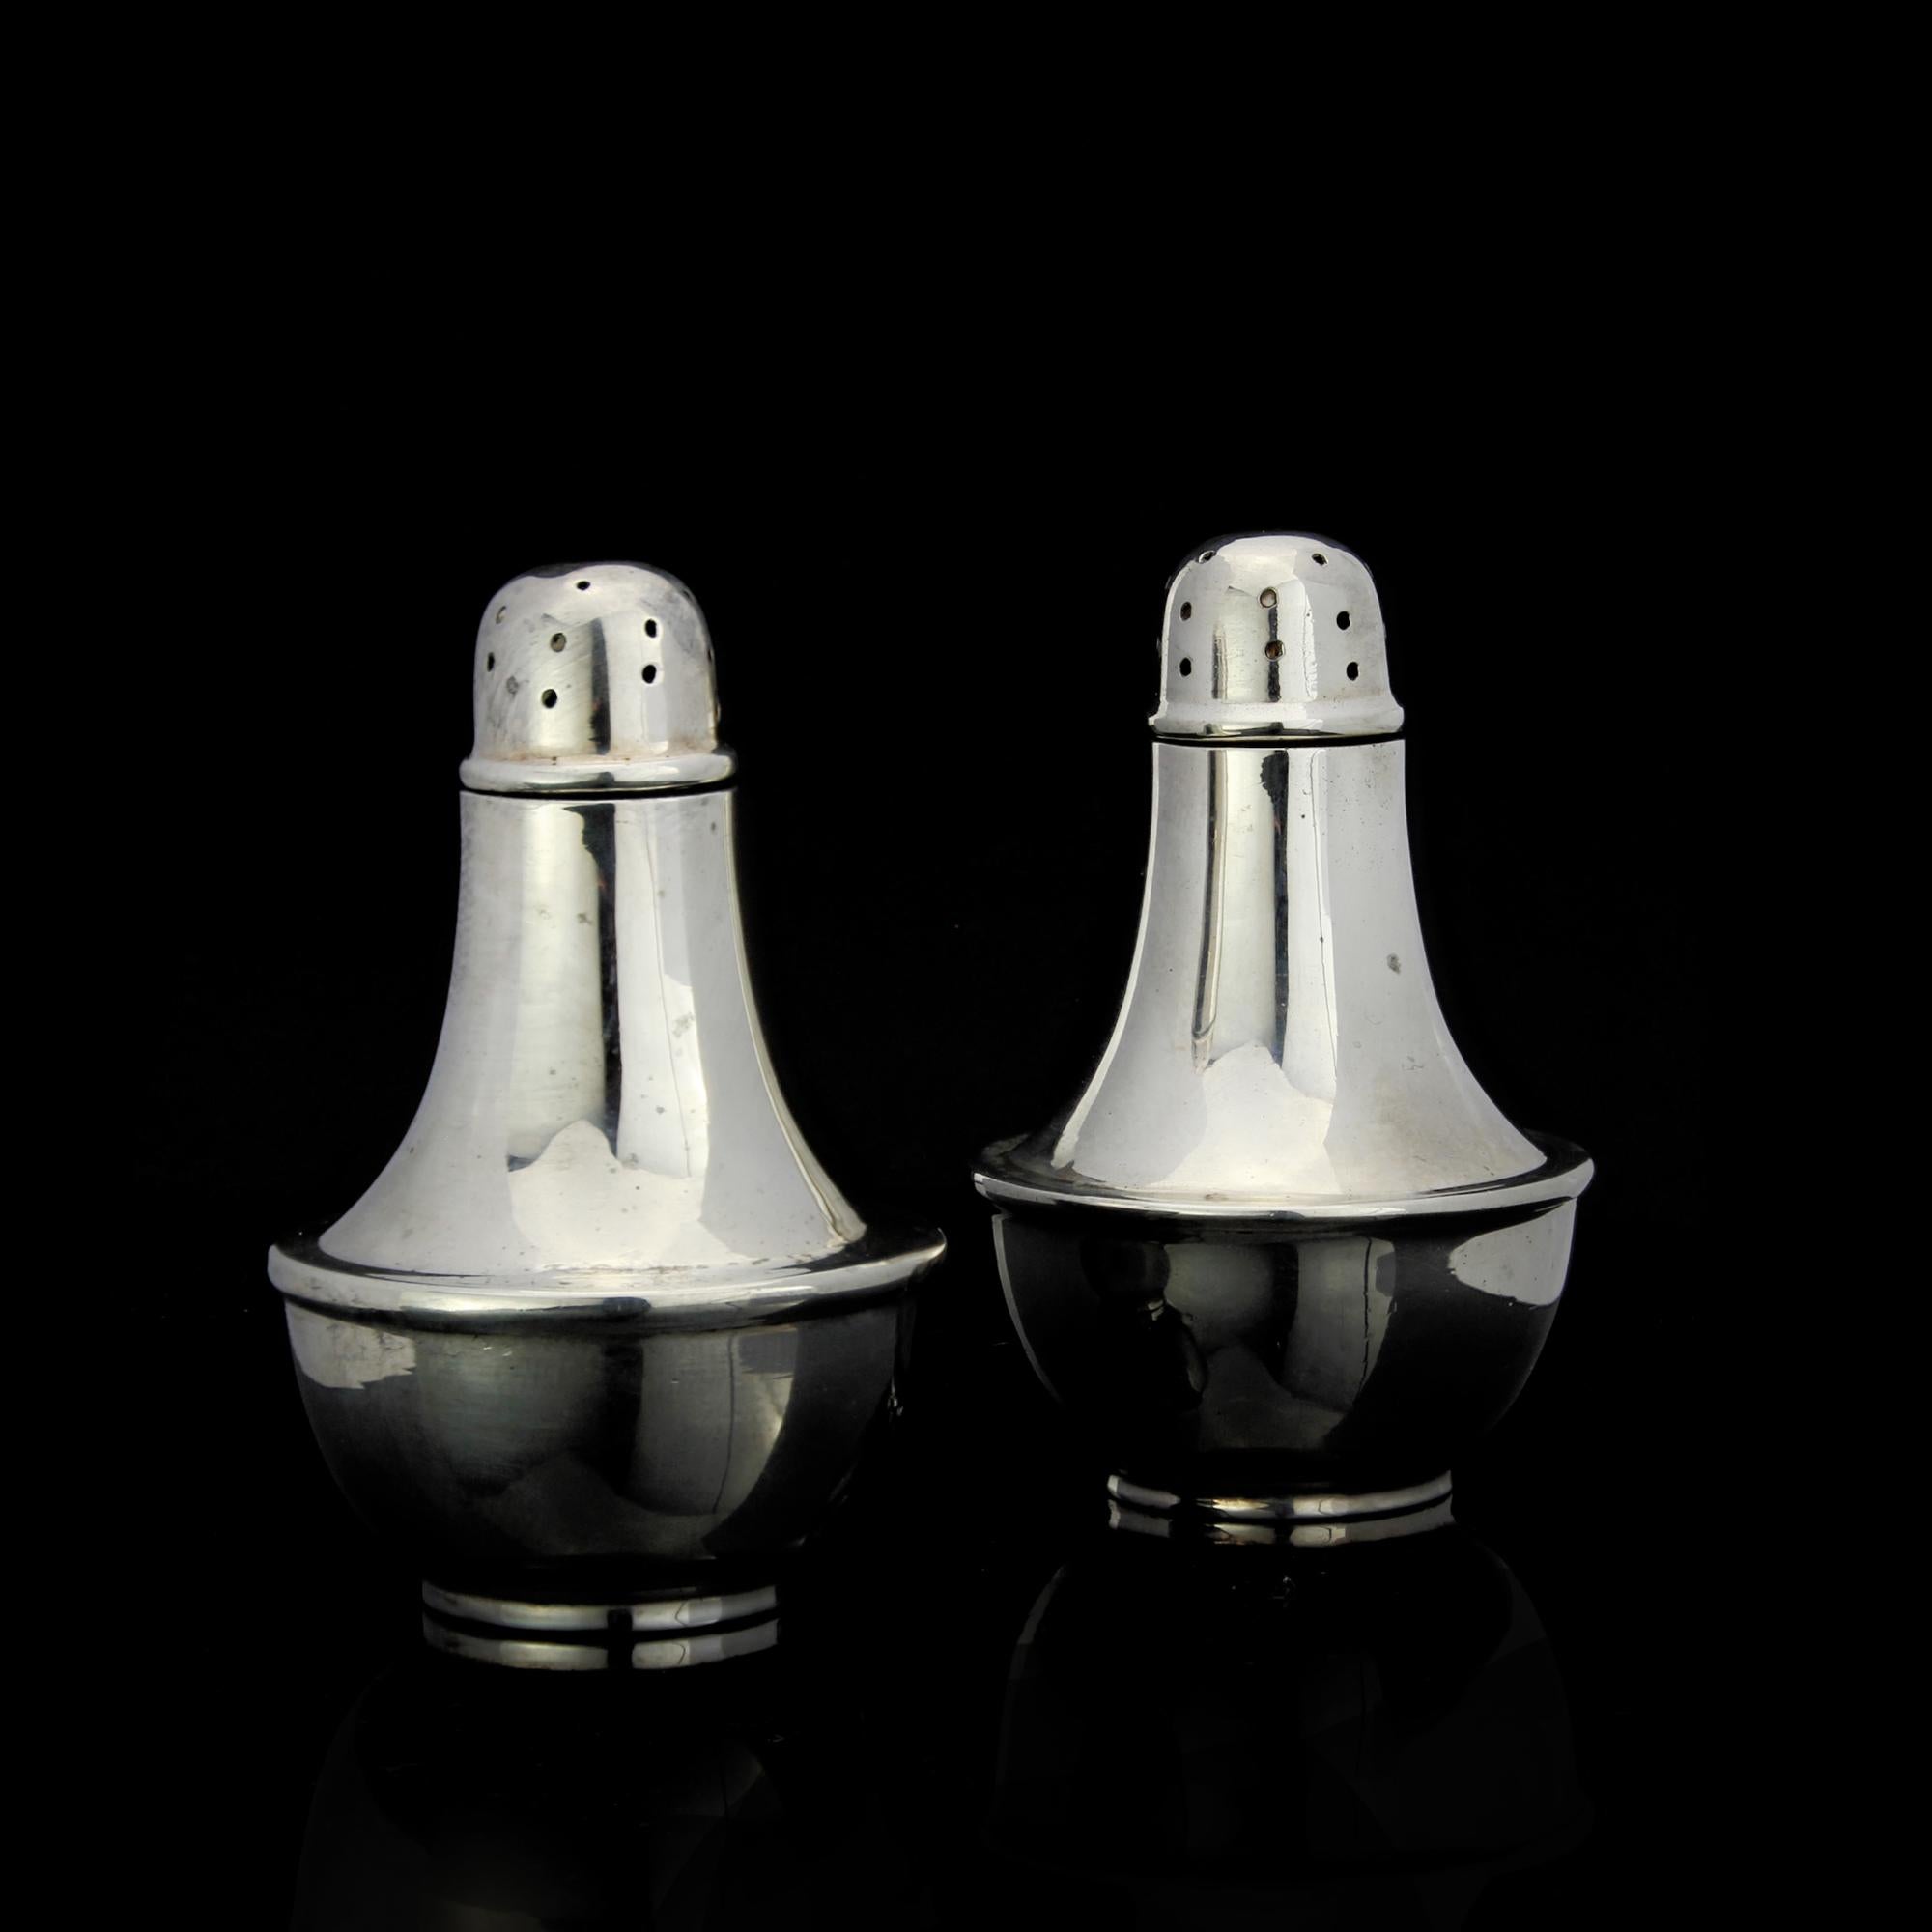 Antique sterling silver small pair of salt and pepper shakers
Maker: JC LTD ( Unidentified )
Made in England, Birmingham, 1932
Fully Hallmarked.

Dimensions:
Size diameter x weight 4.5 x 7 cm
Weight 59 grams

Condition report: Shakers are